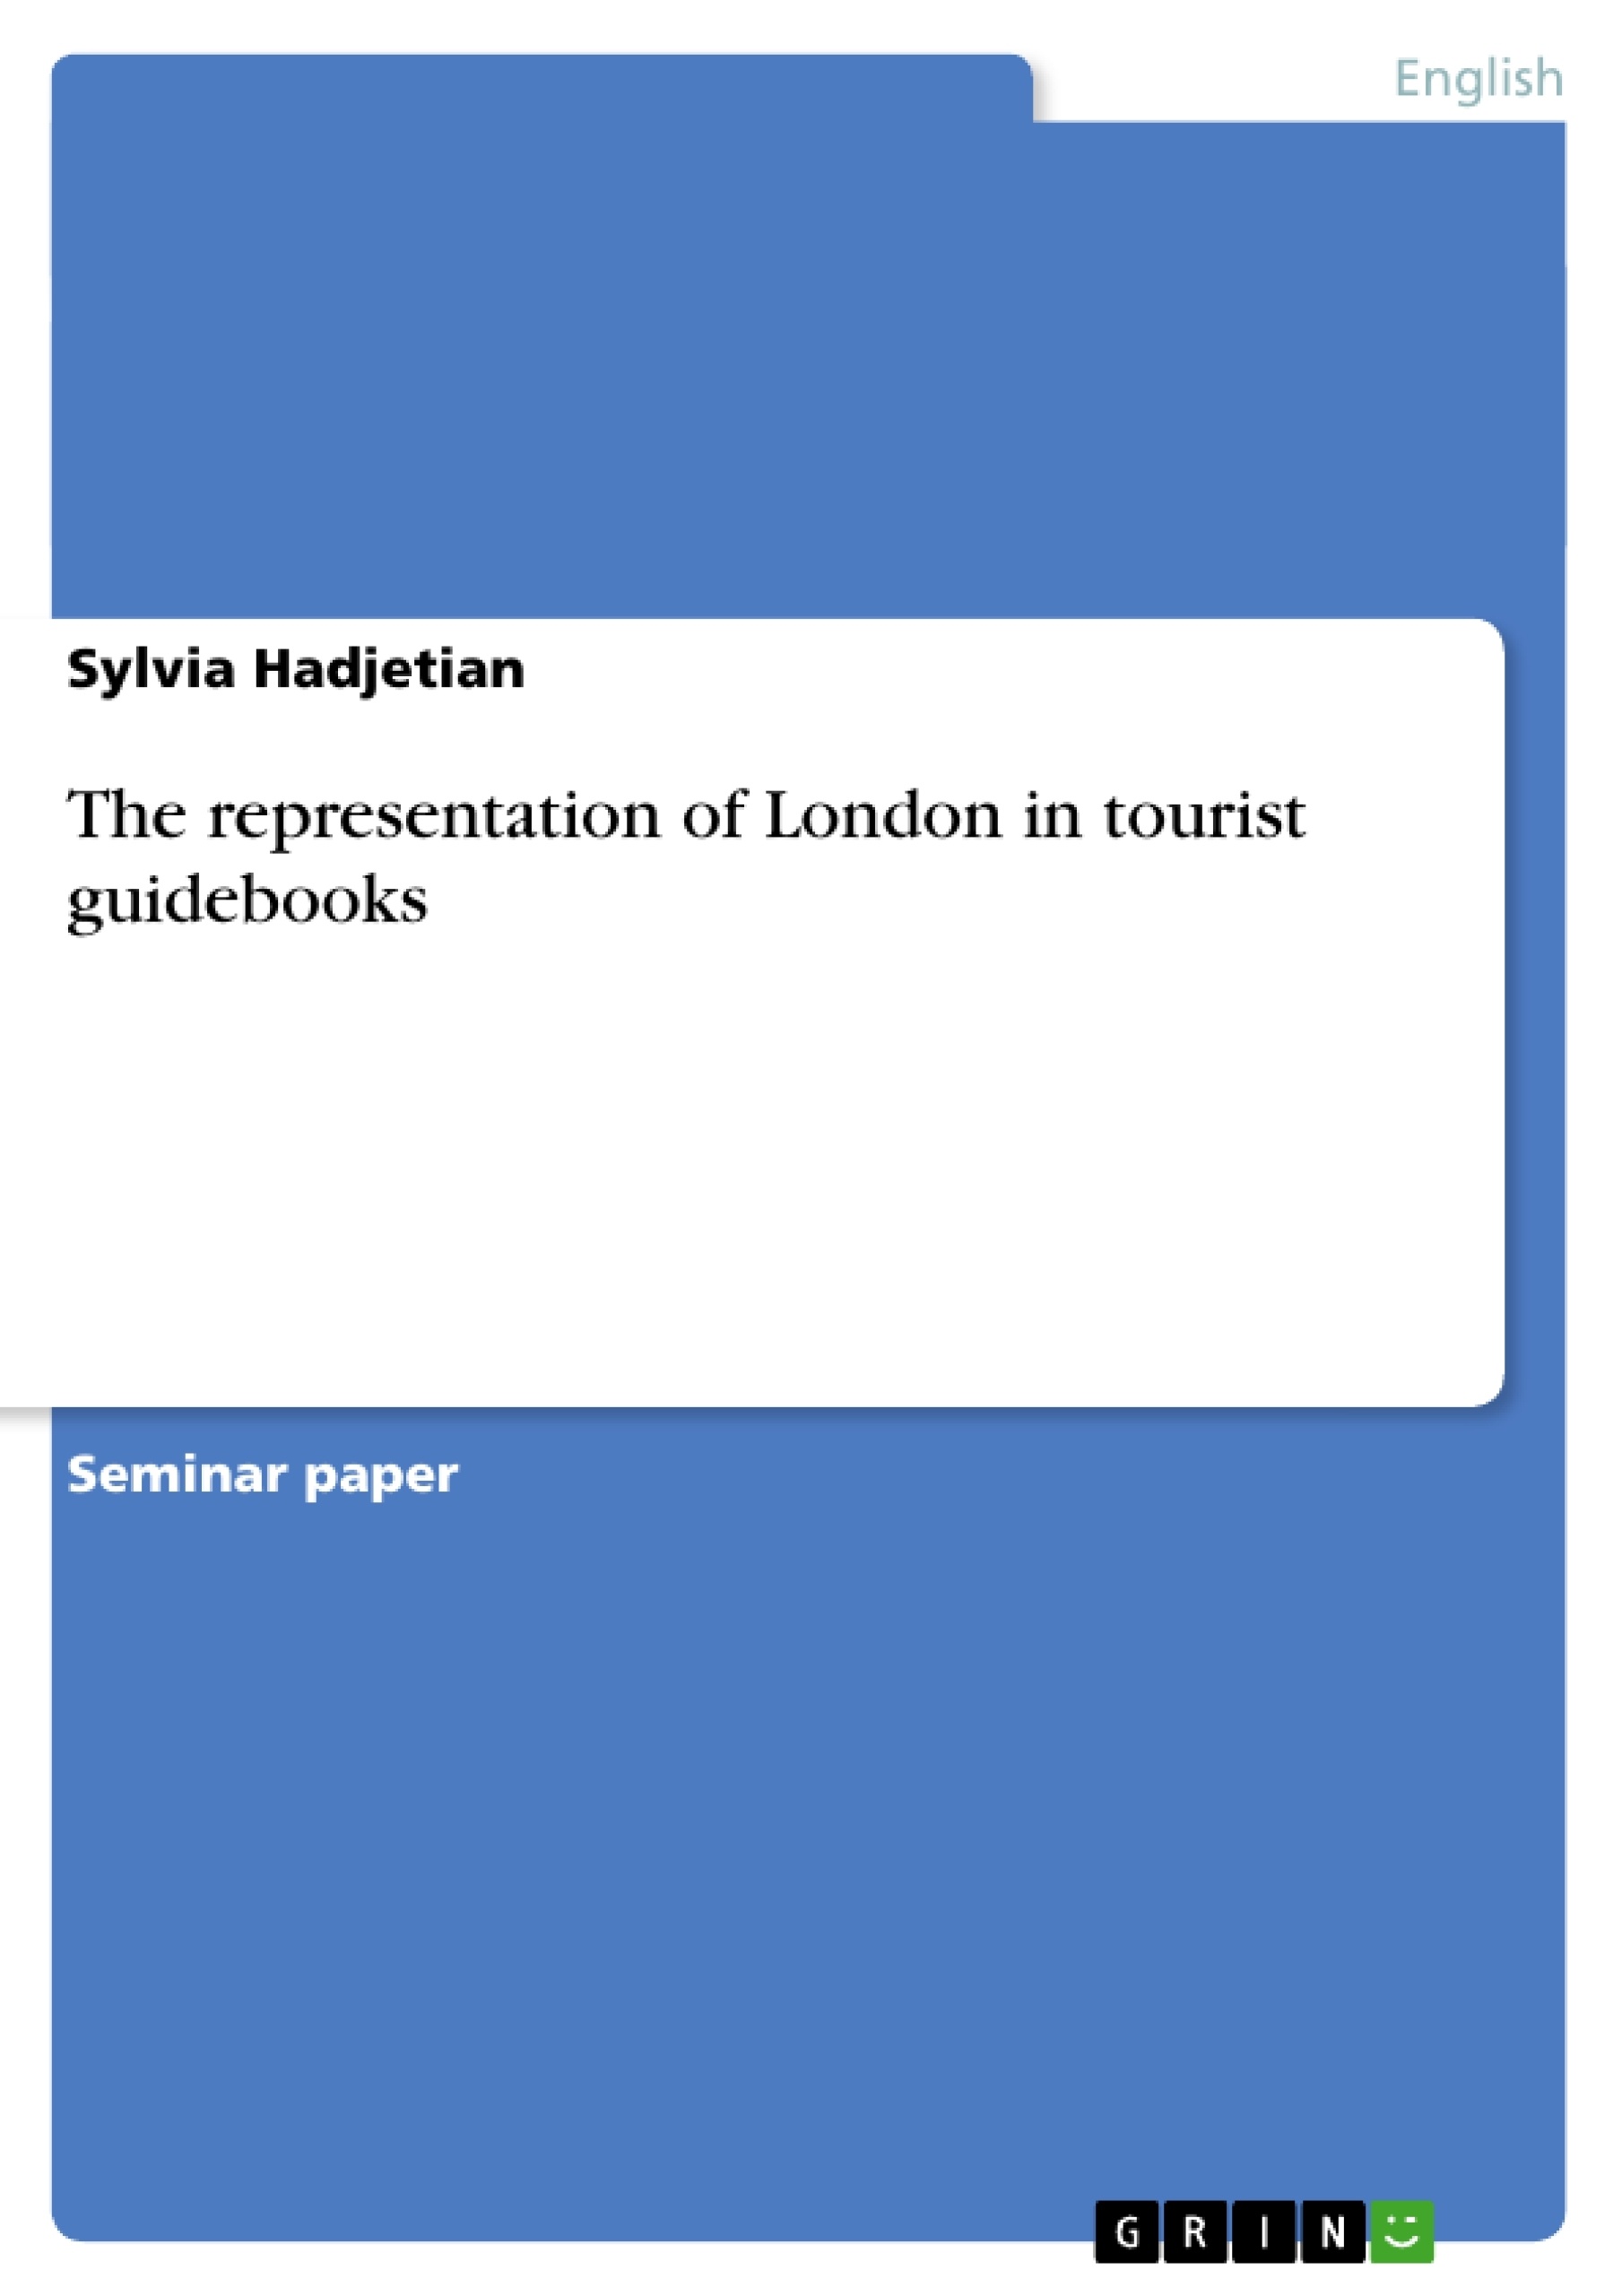 Título: The representation of London in tourist guidebooks